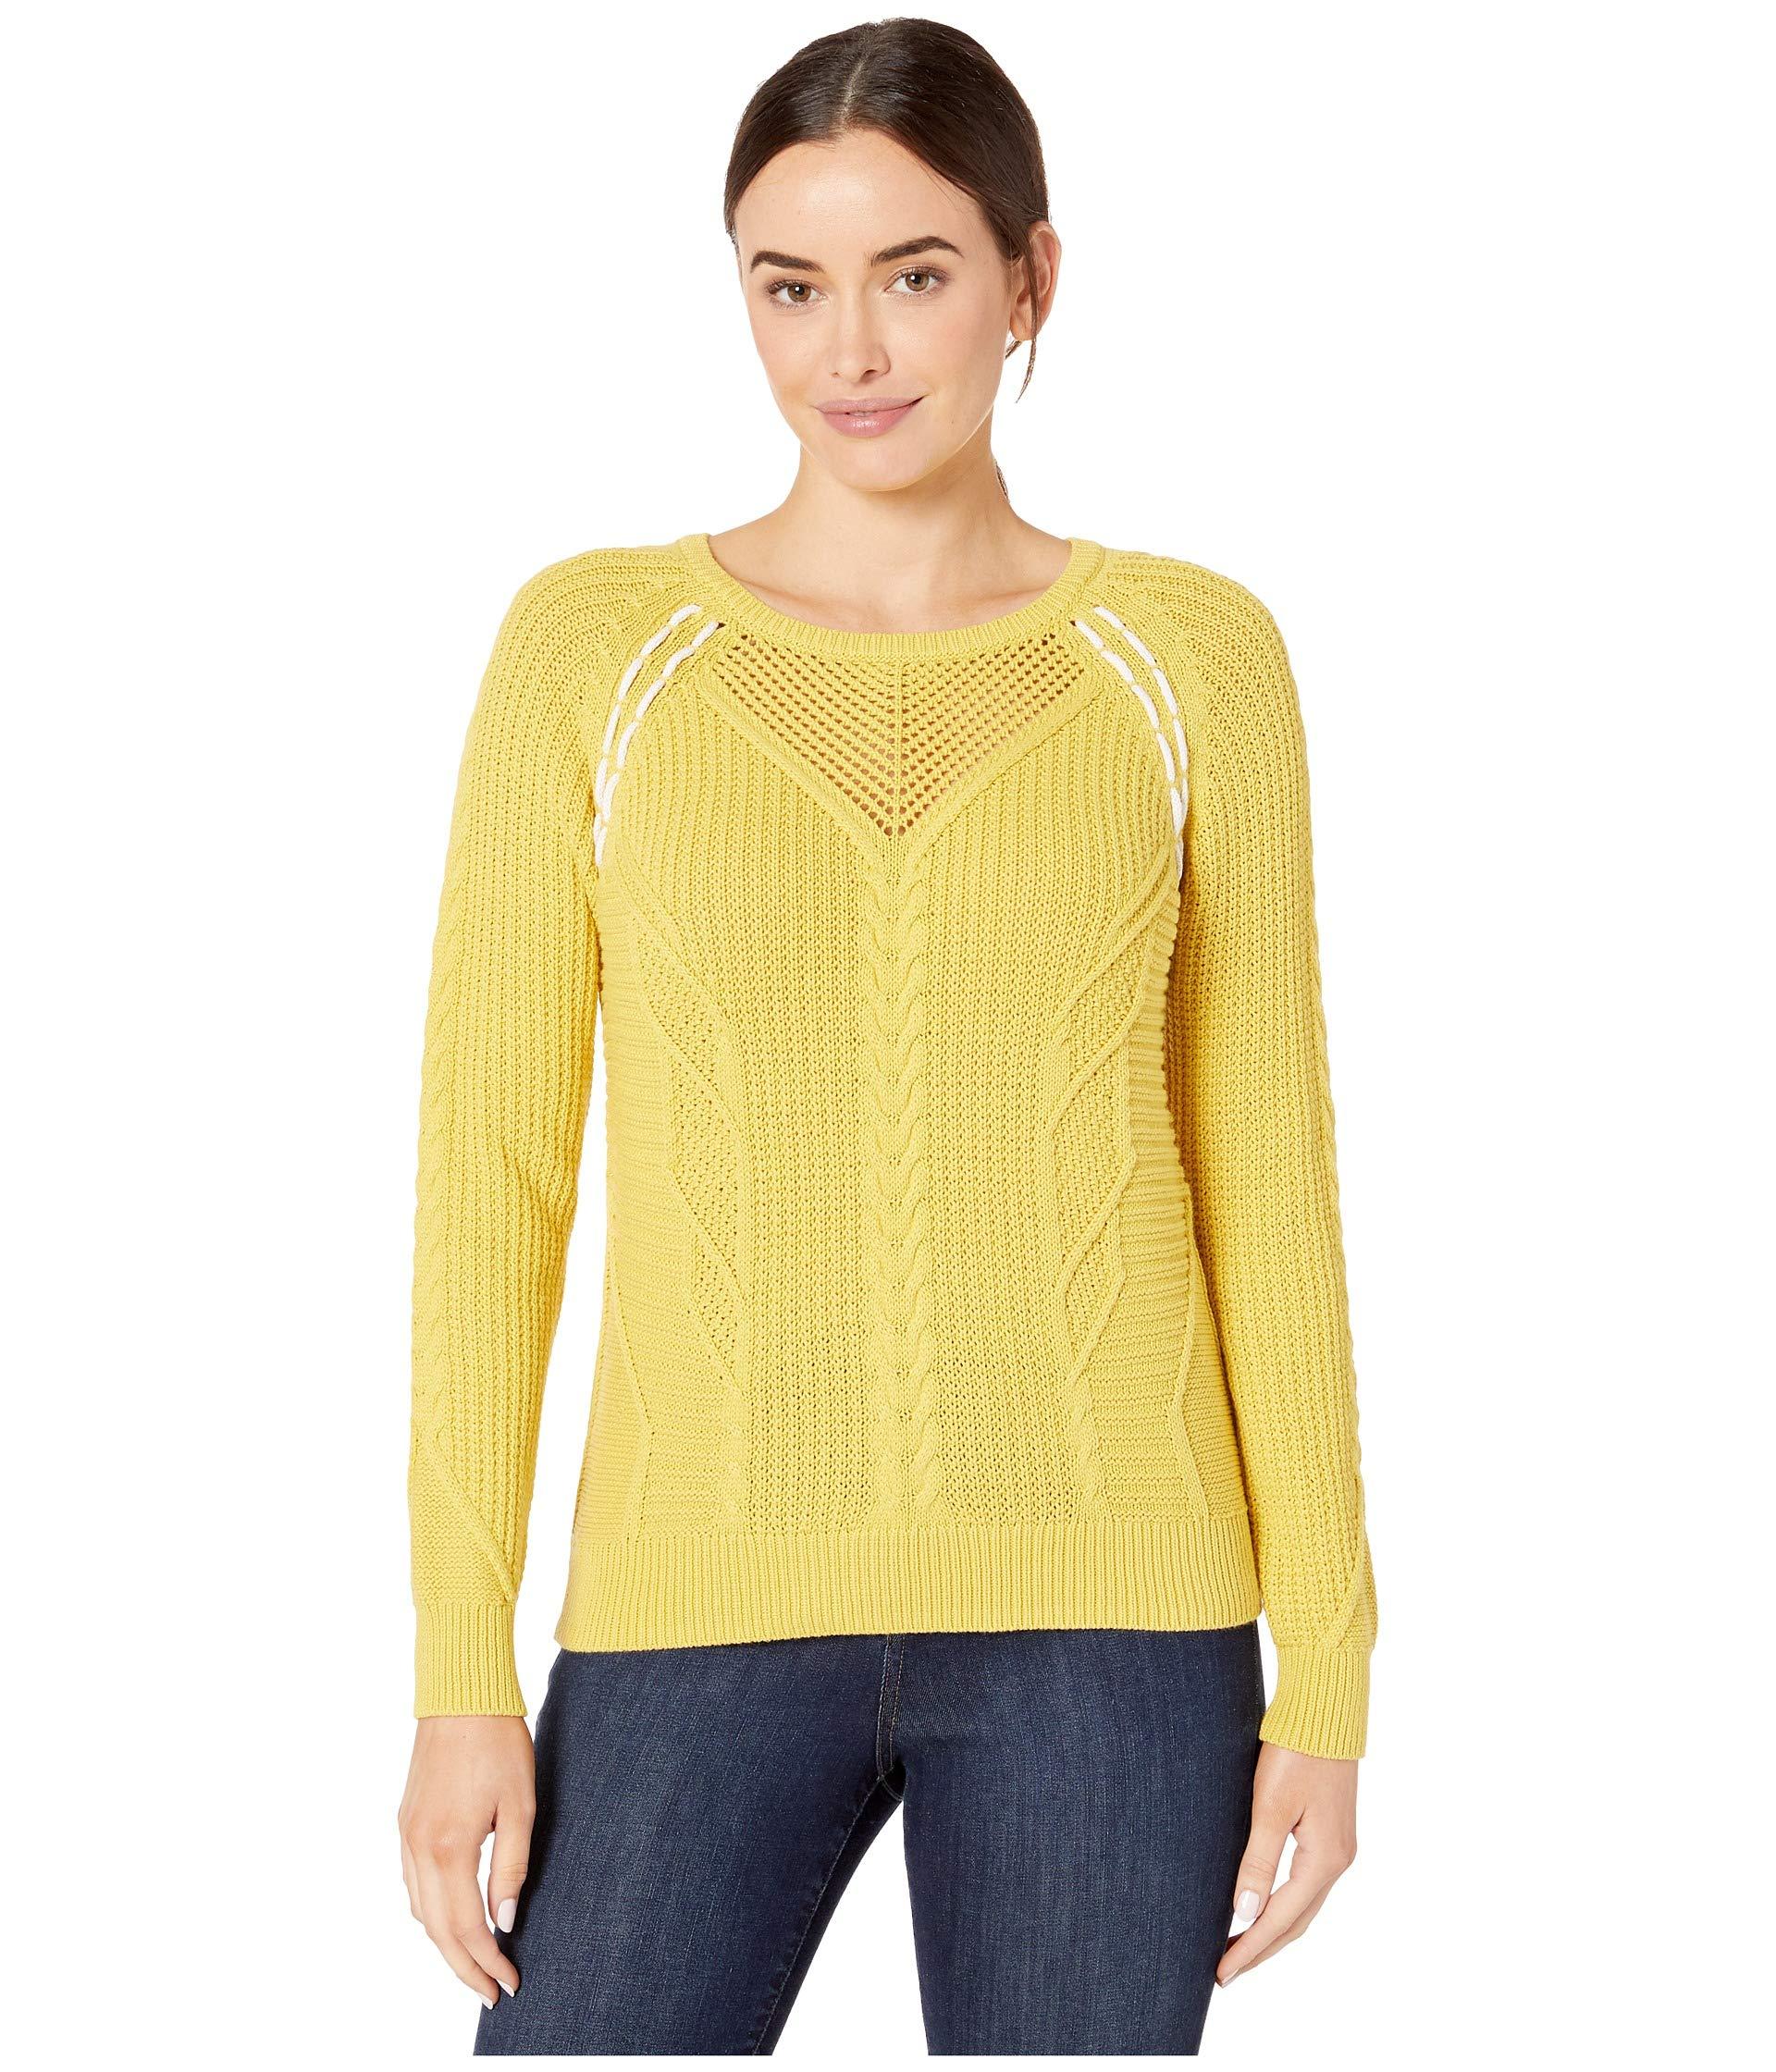 Lilla P Cotton Cable Stitch Pullover Sweater in Yellow - Lyst